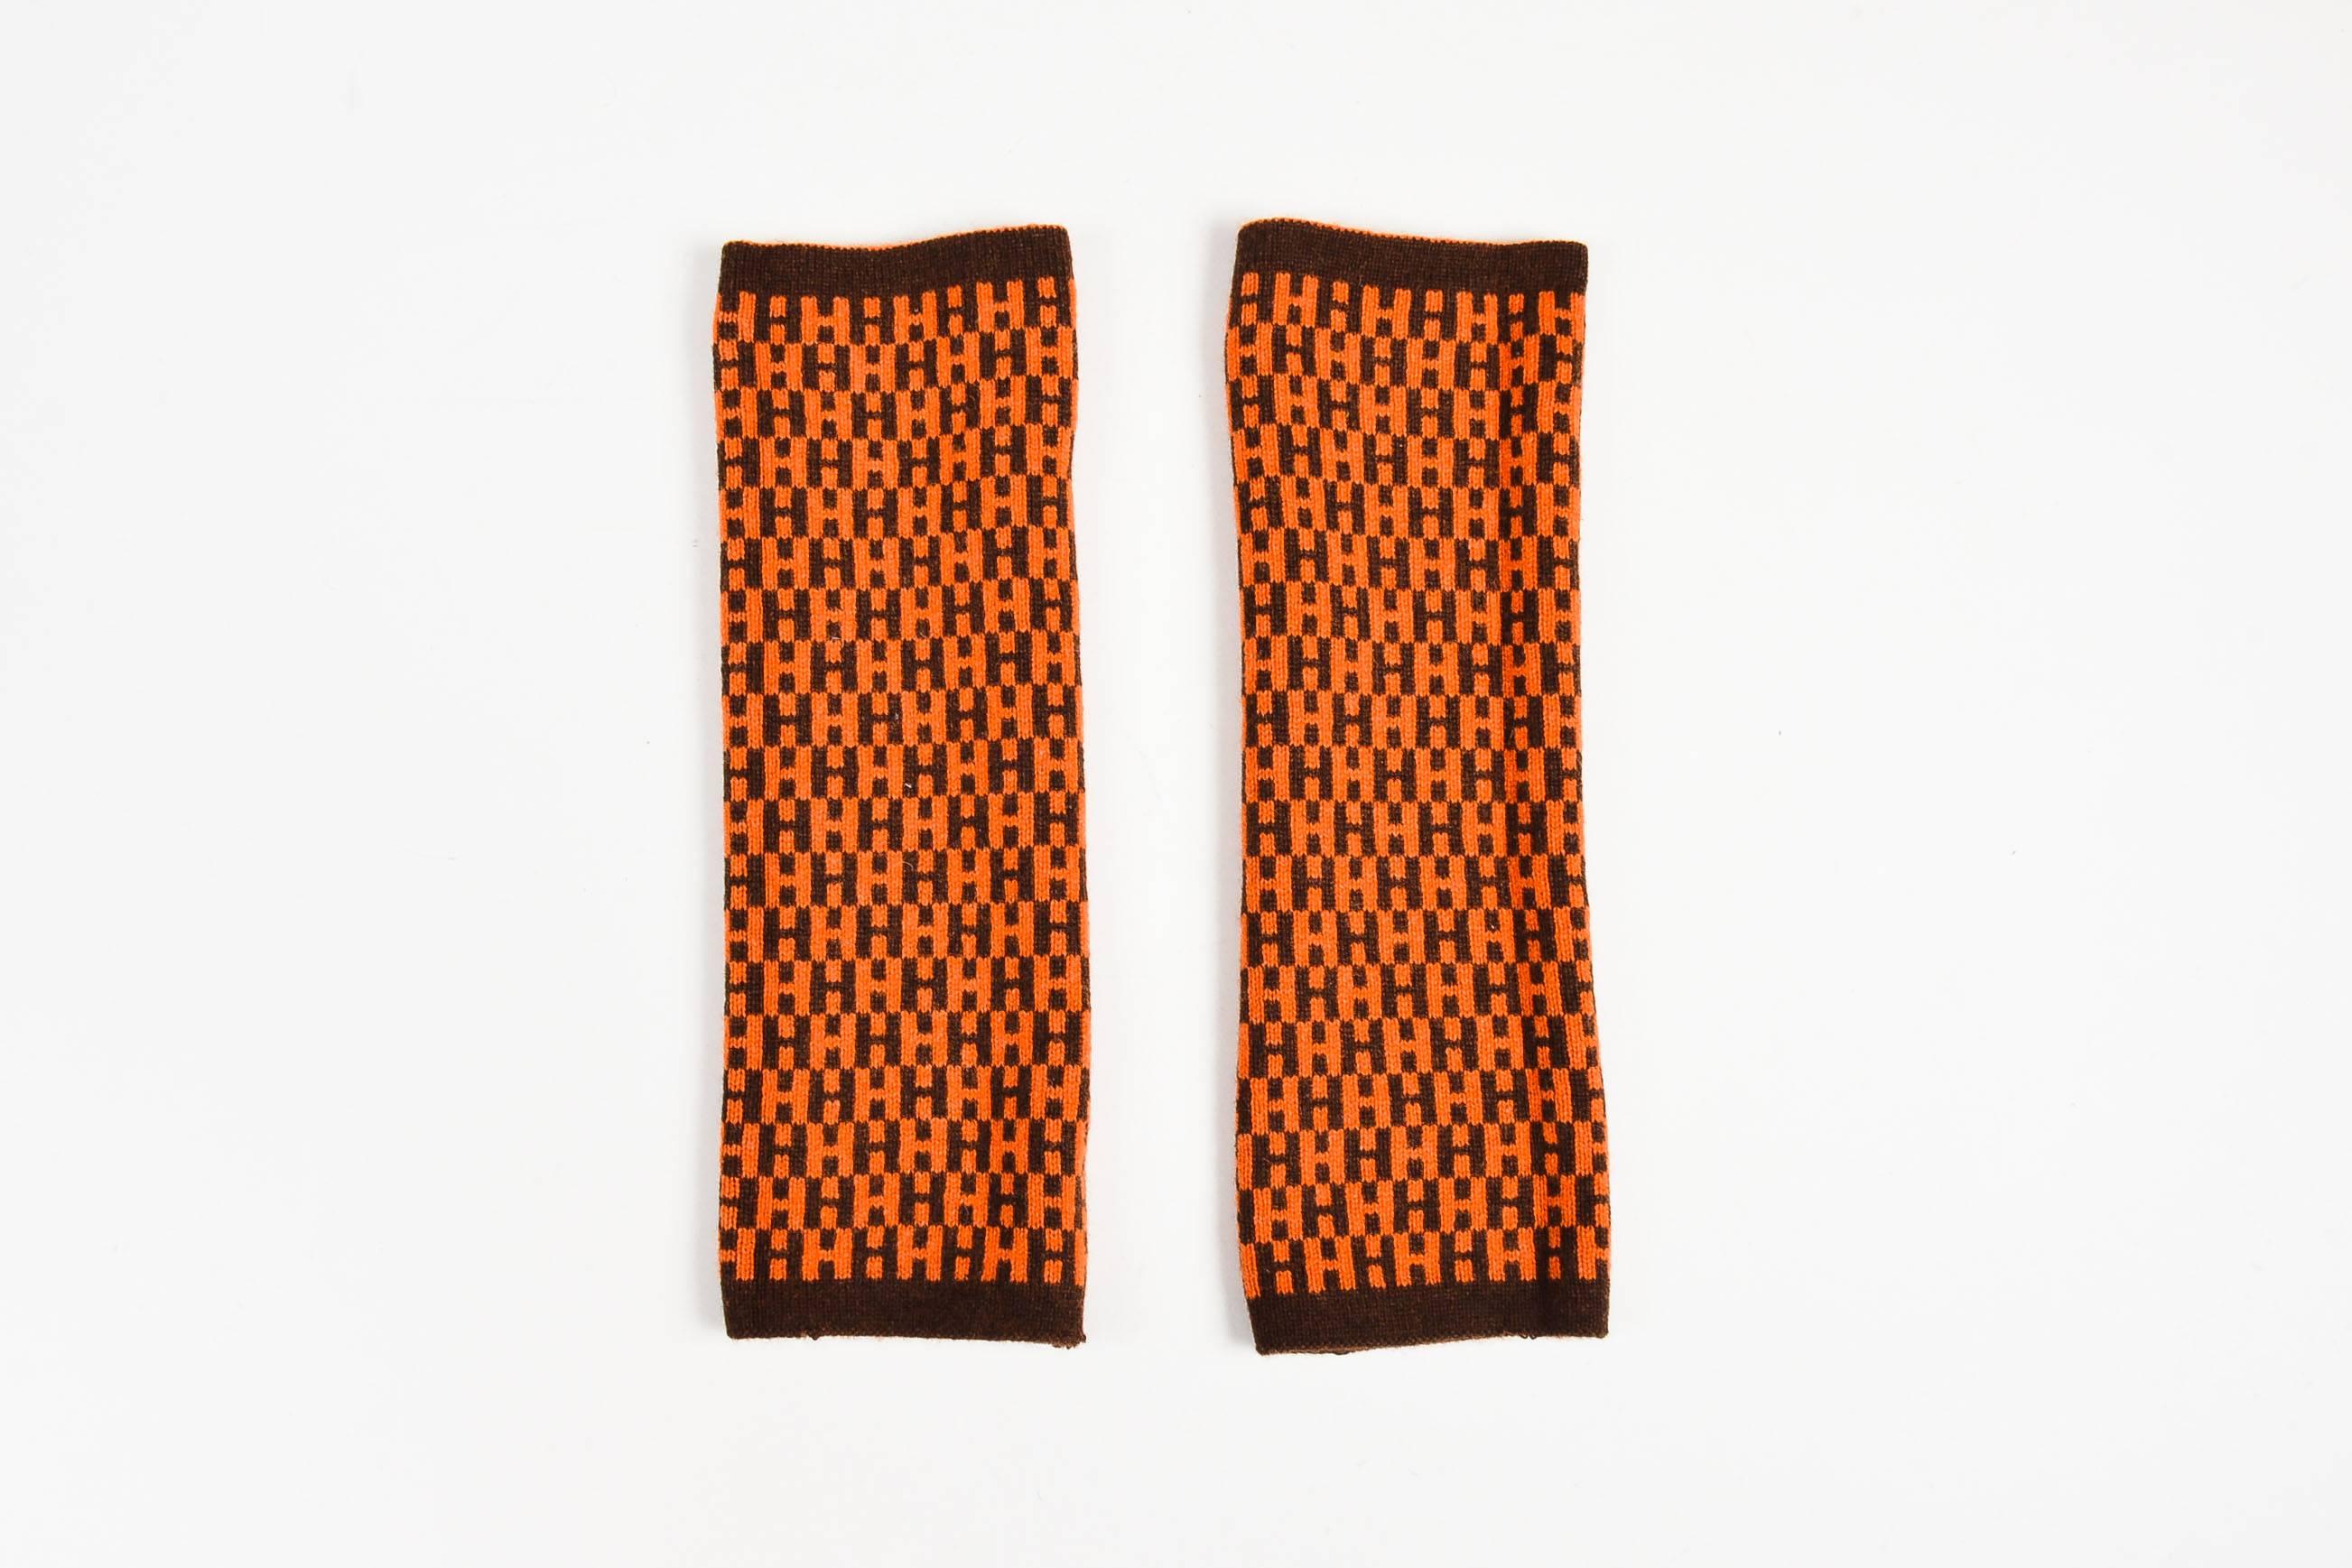 Knit arm warmers featuring an allover 'H' logo pattern, a reversible design, and a thumb hole.

Condition details: Pre-owned. This item is in good condition. Some pilling and fuzziness; characteristic of material. No other visible signs of wear